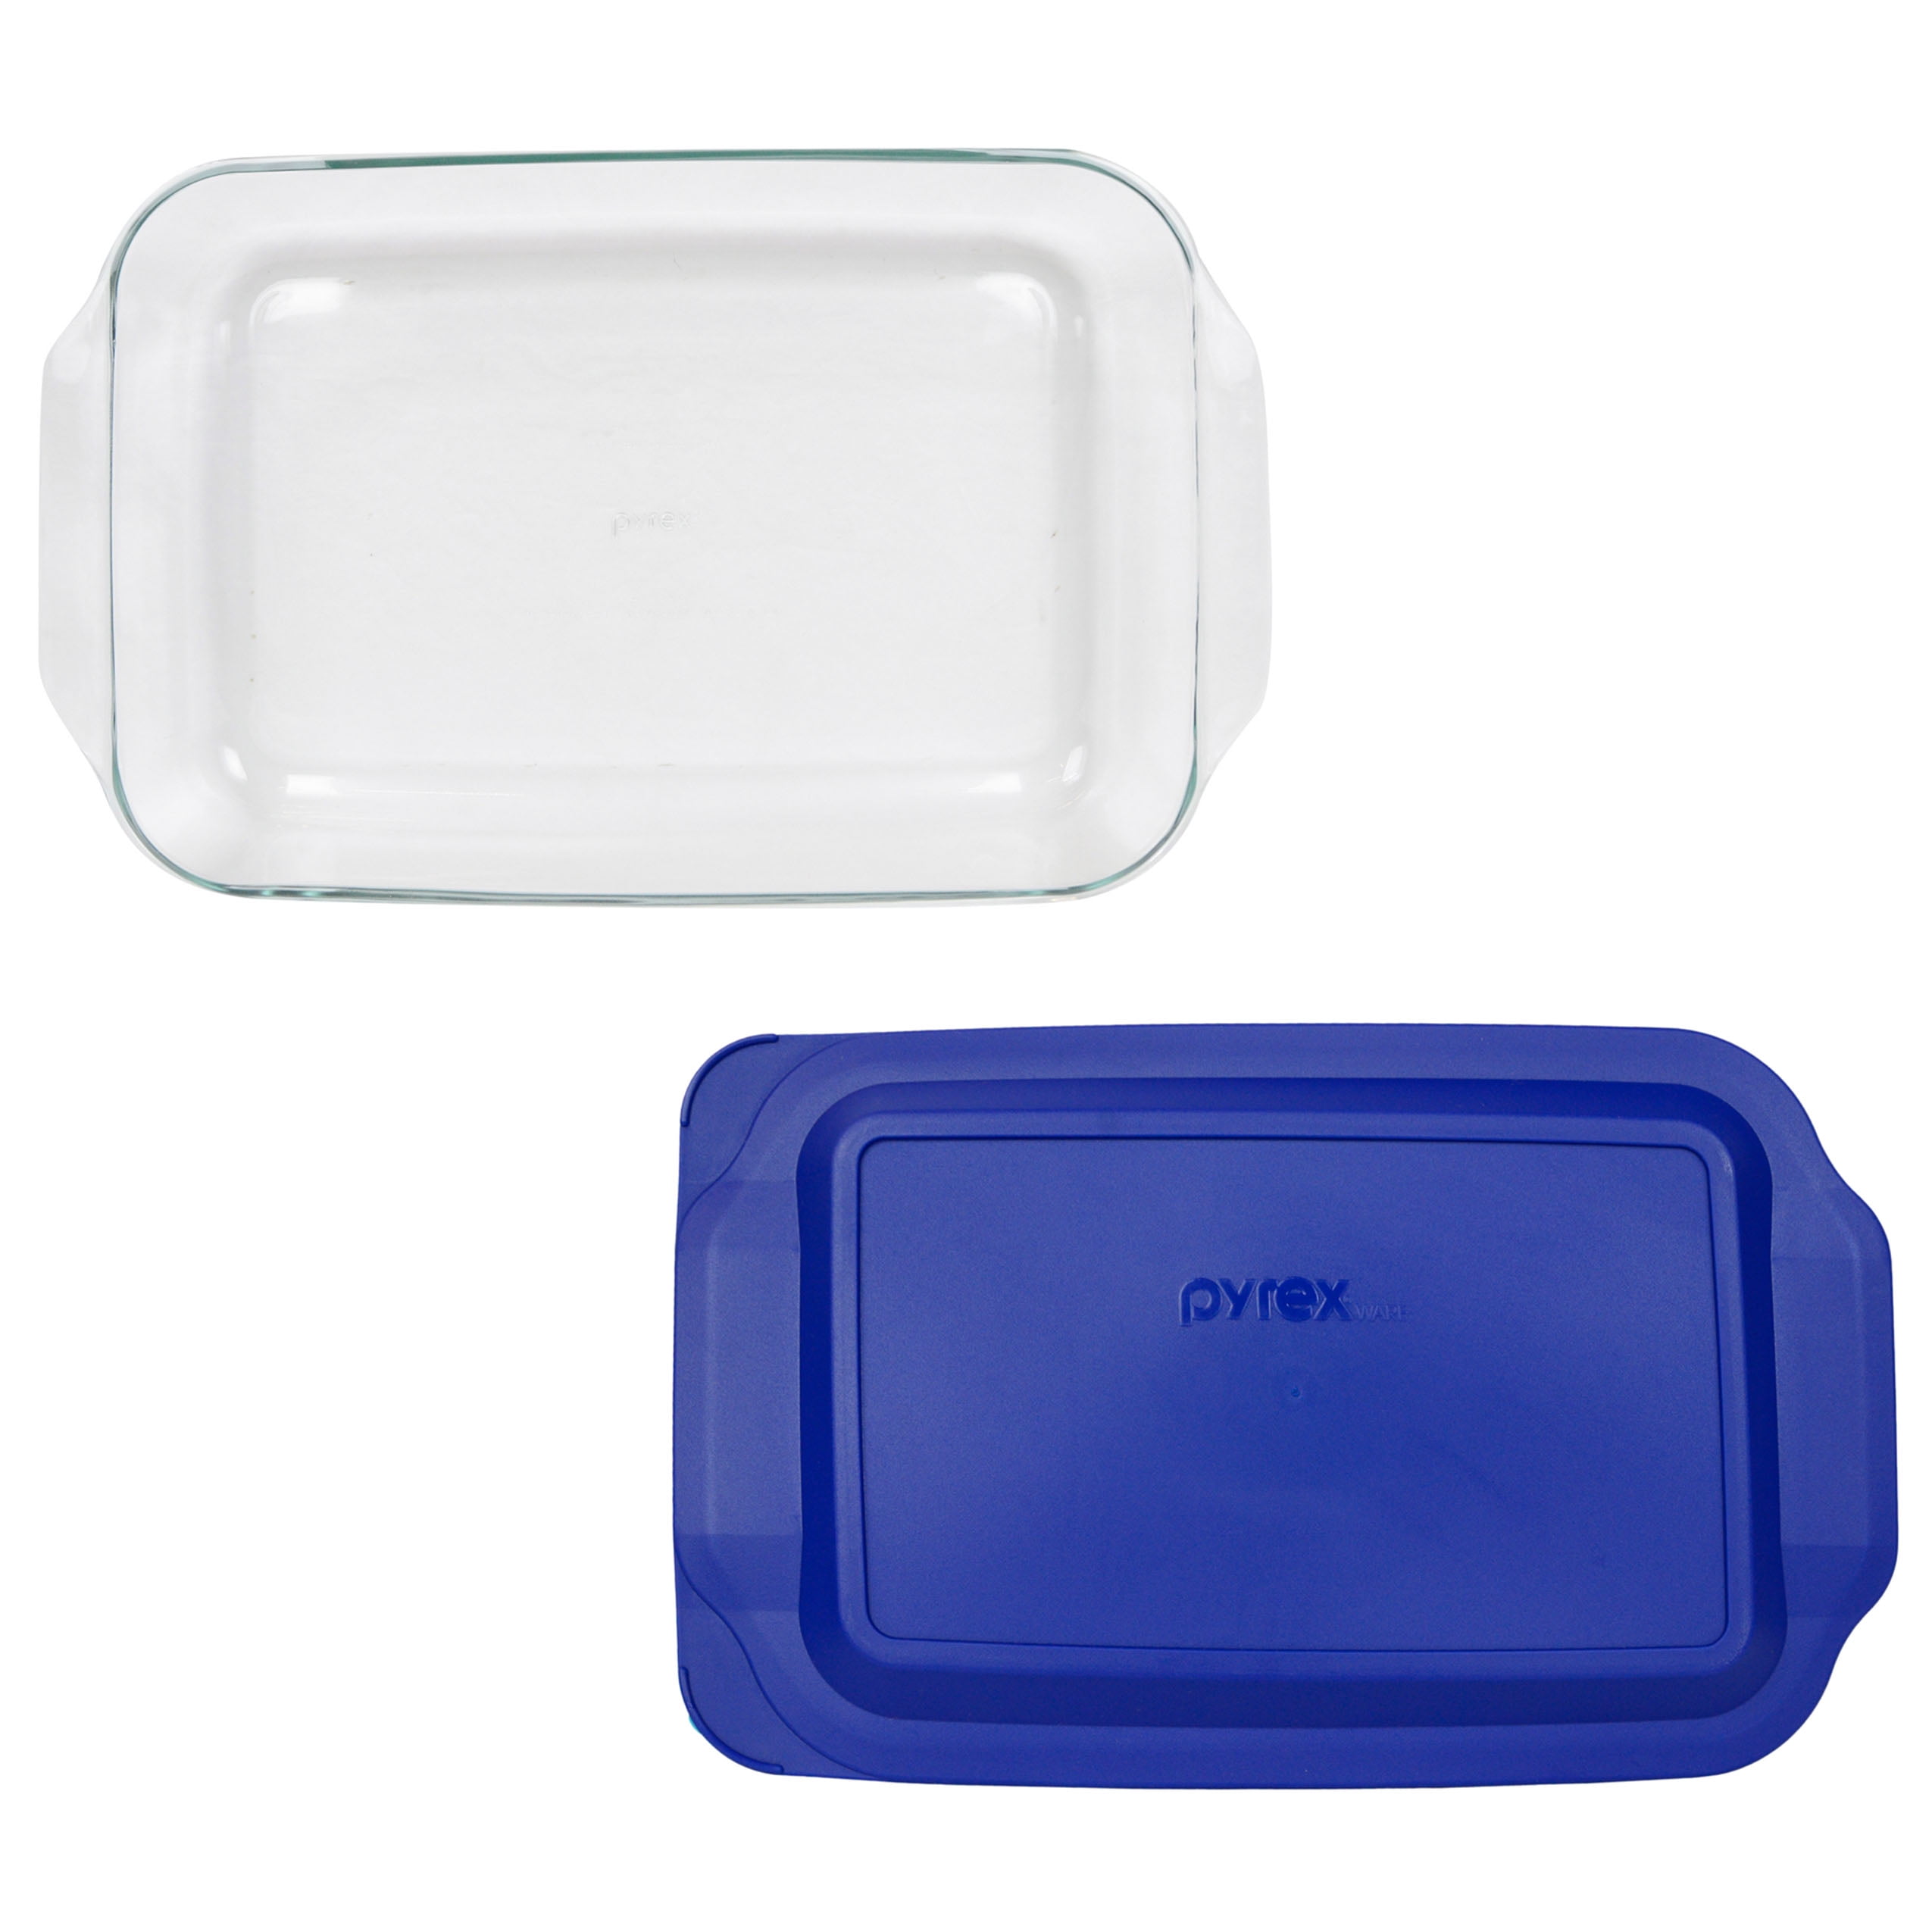  Corning Ware/Pyrex Clear Square Glass Lid (Clear) (8